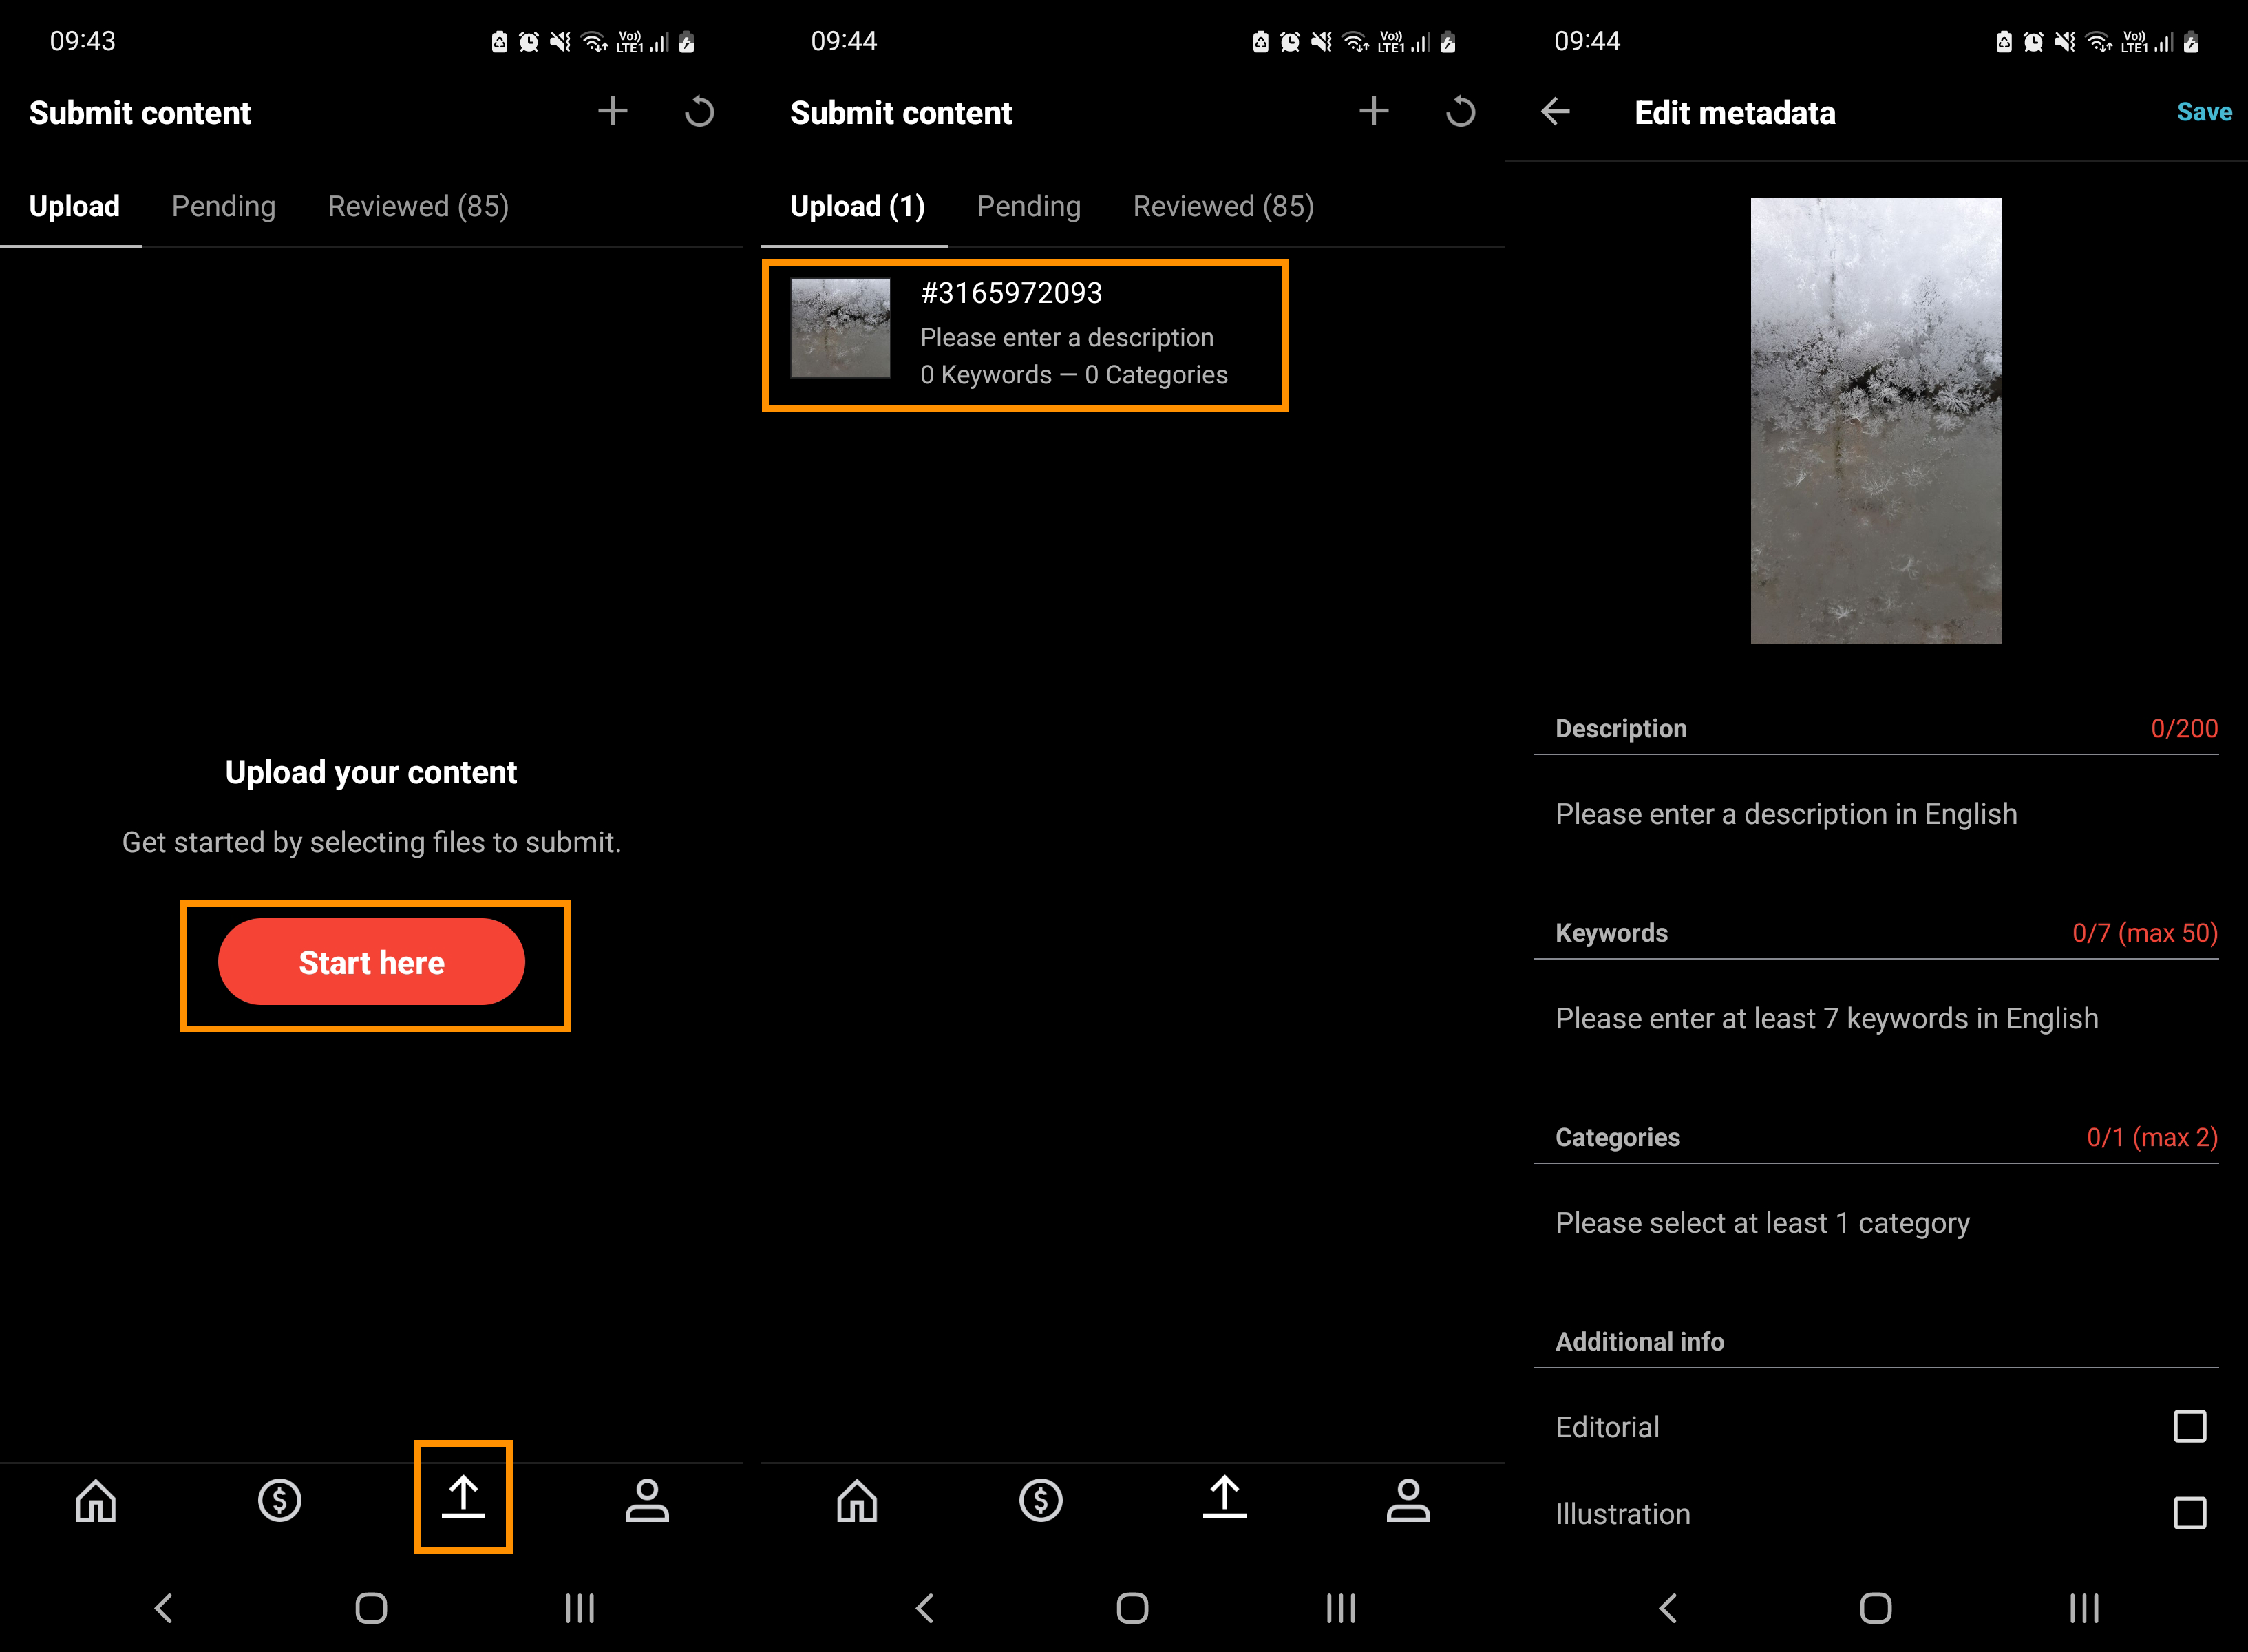 How to Upload Content to Shutterstock from a Mobile Device.